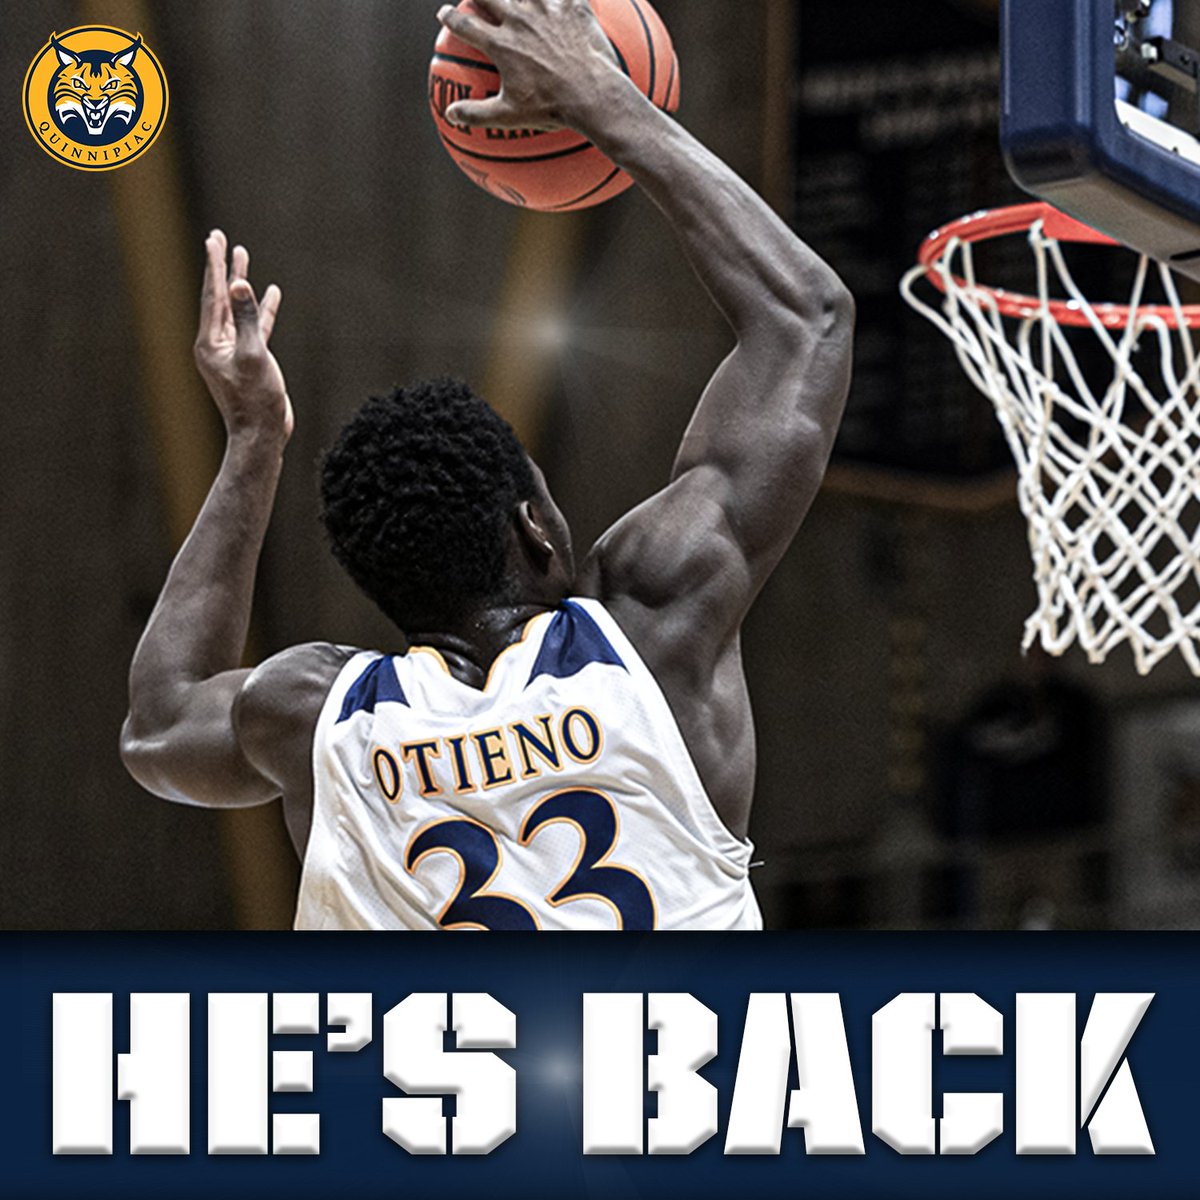 𝗥𝗨𝗡 𝗜𝗧 𝗕𝗔𝗖𝗞 😼 Paul Otieno is back with the Bobcats for 2024-25! #BobcatNation x #MAACHoops